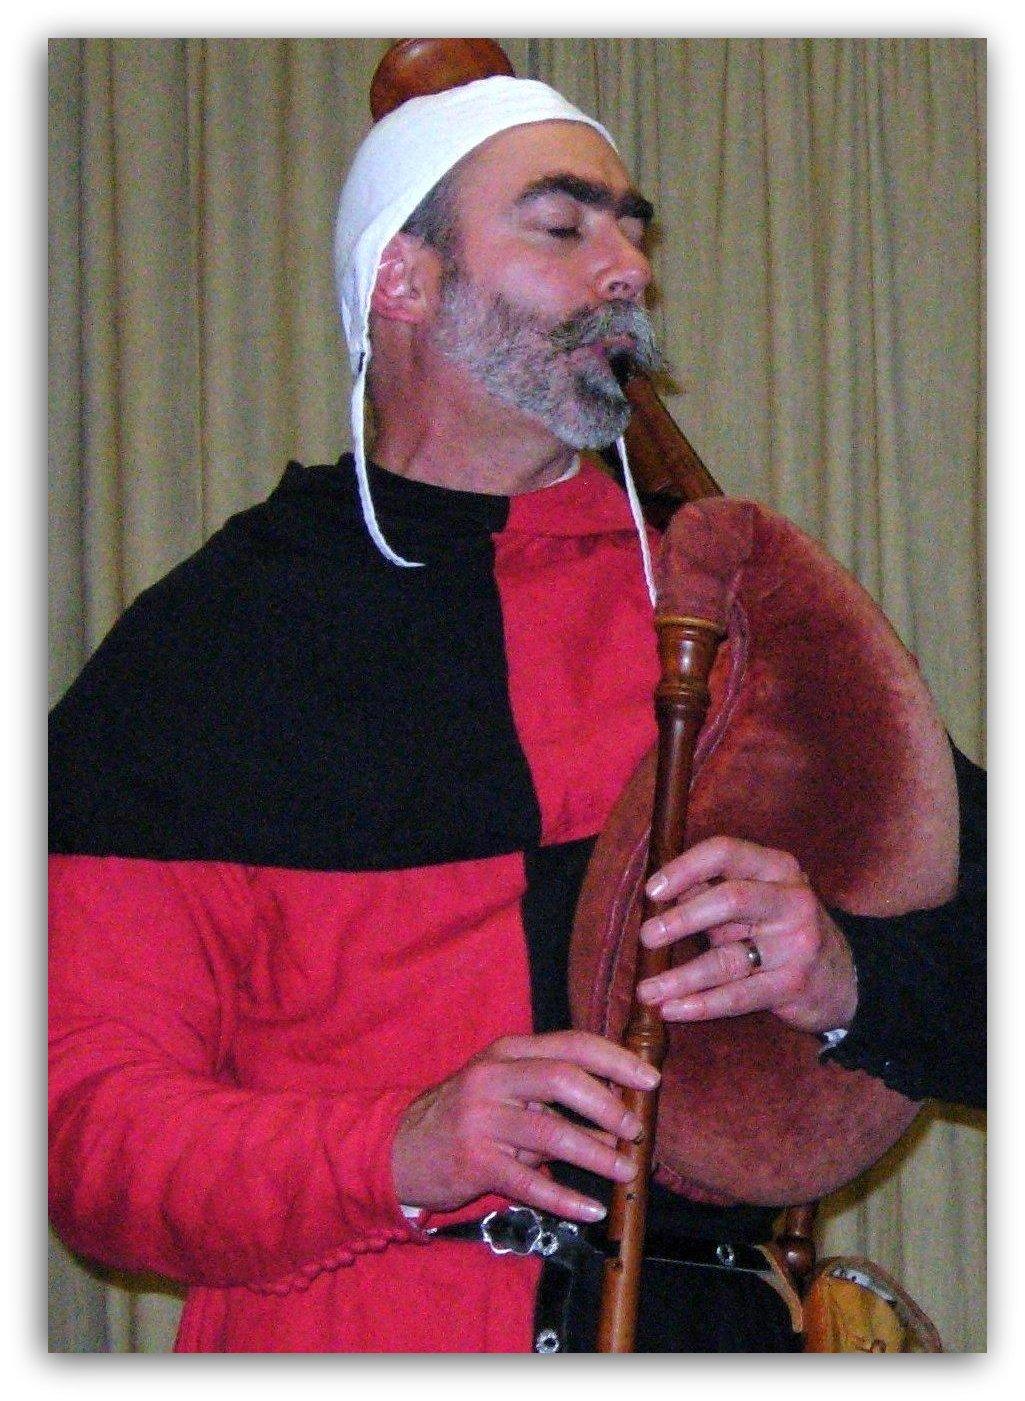 medieval musician entertains guests at banquet